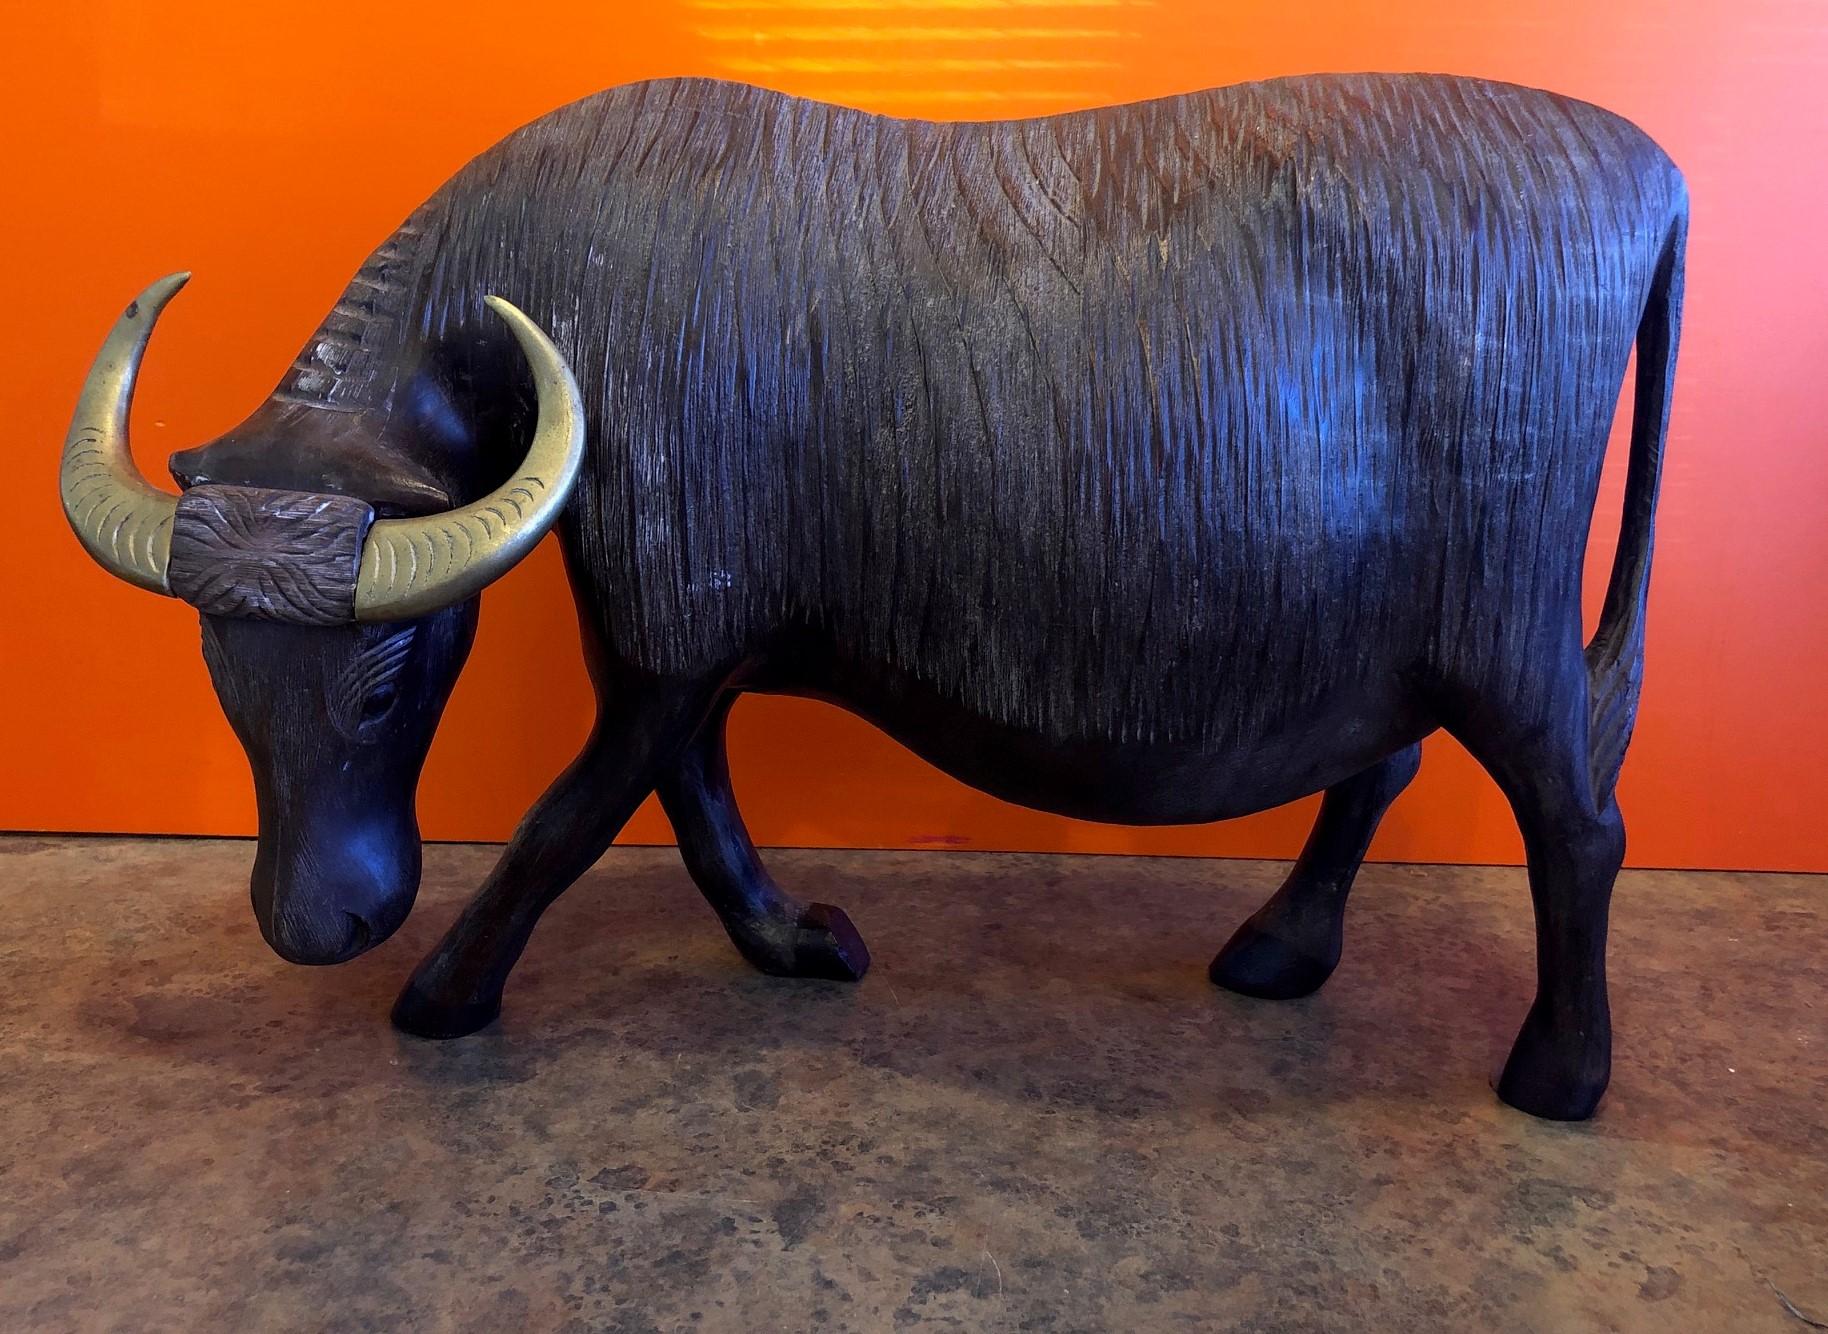 Impressive midcentury carved wood charging bull with brass horns from Mexico, circa 1970s. The piece is finely carved with intricate detail and has great color and patina.